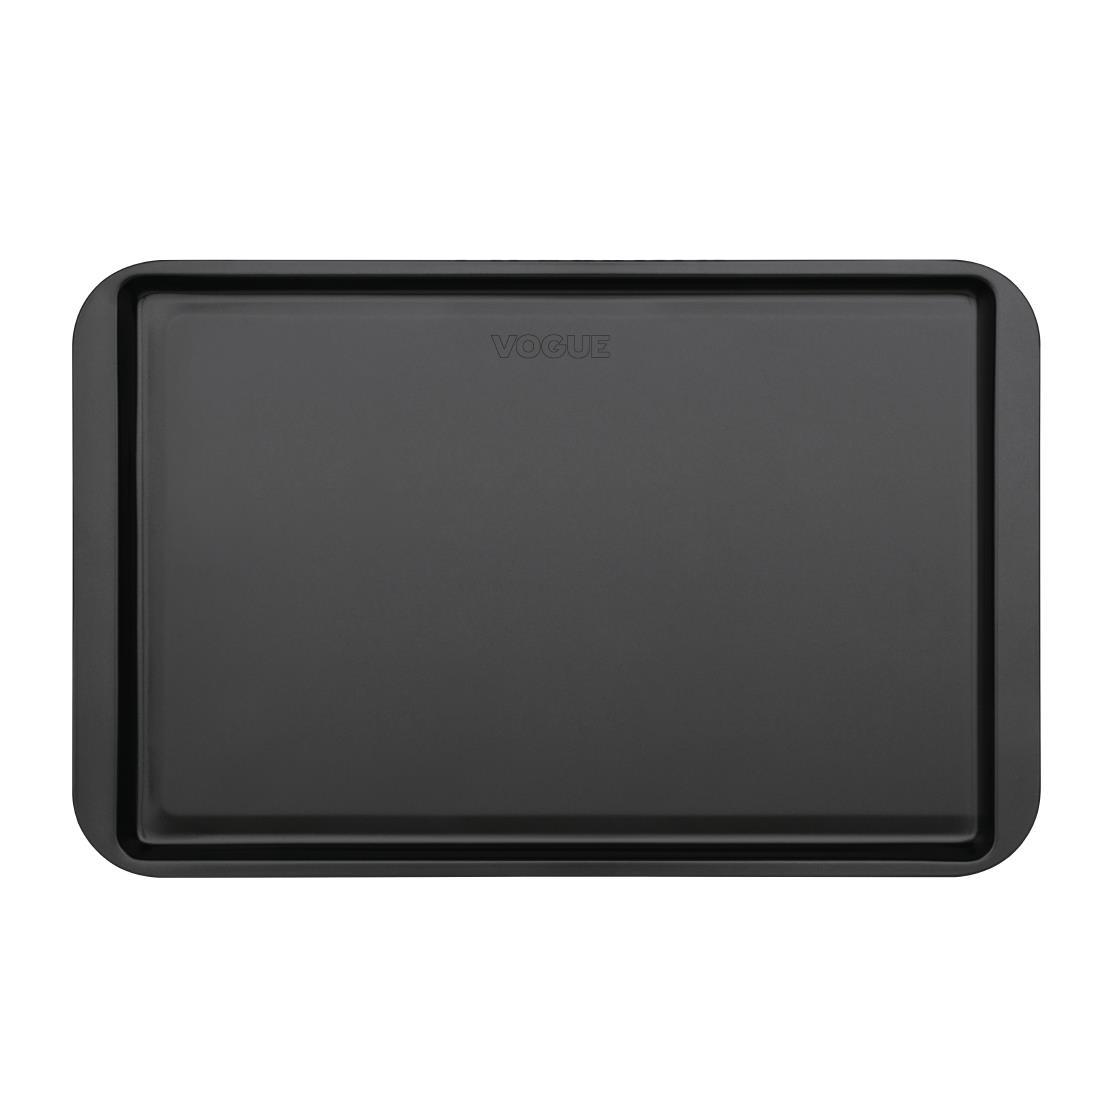 Vogue Non-Stick Carbon Steel Baking Tray 482 x 305mm - GD016  - 3